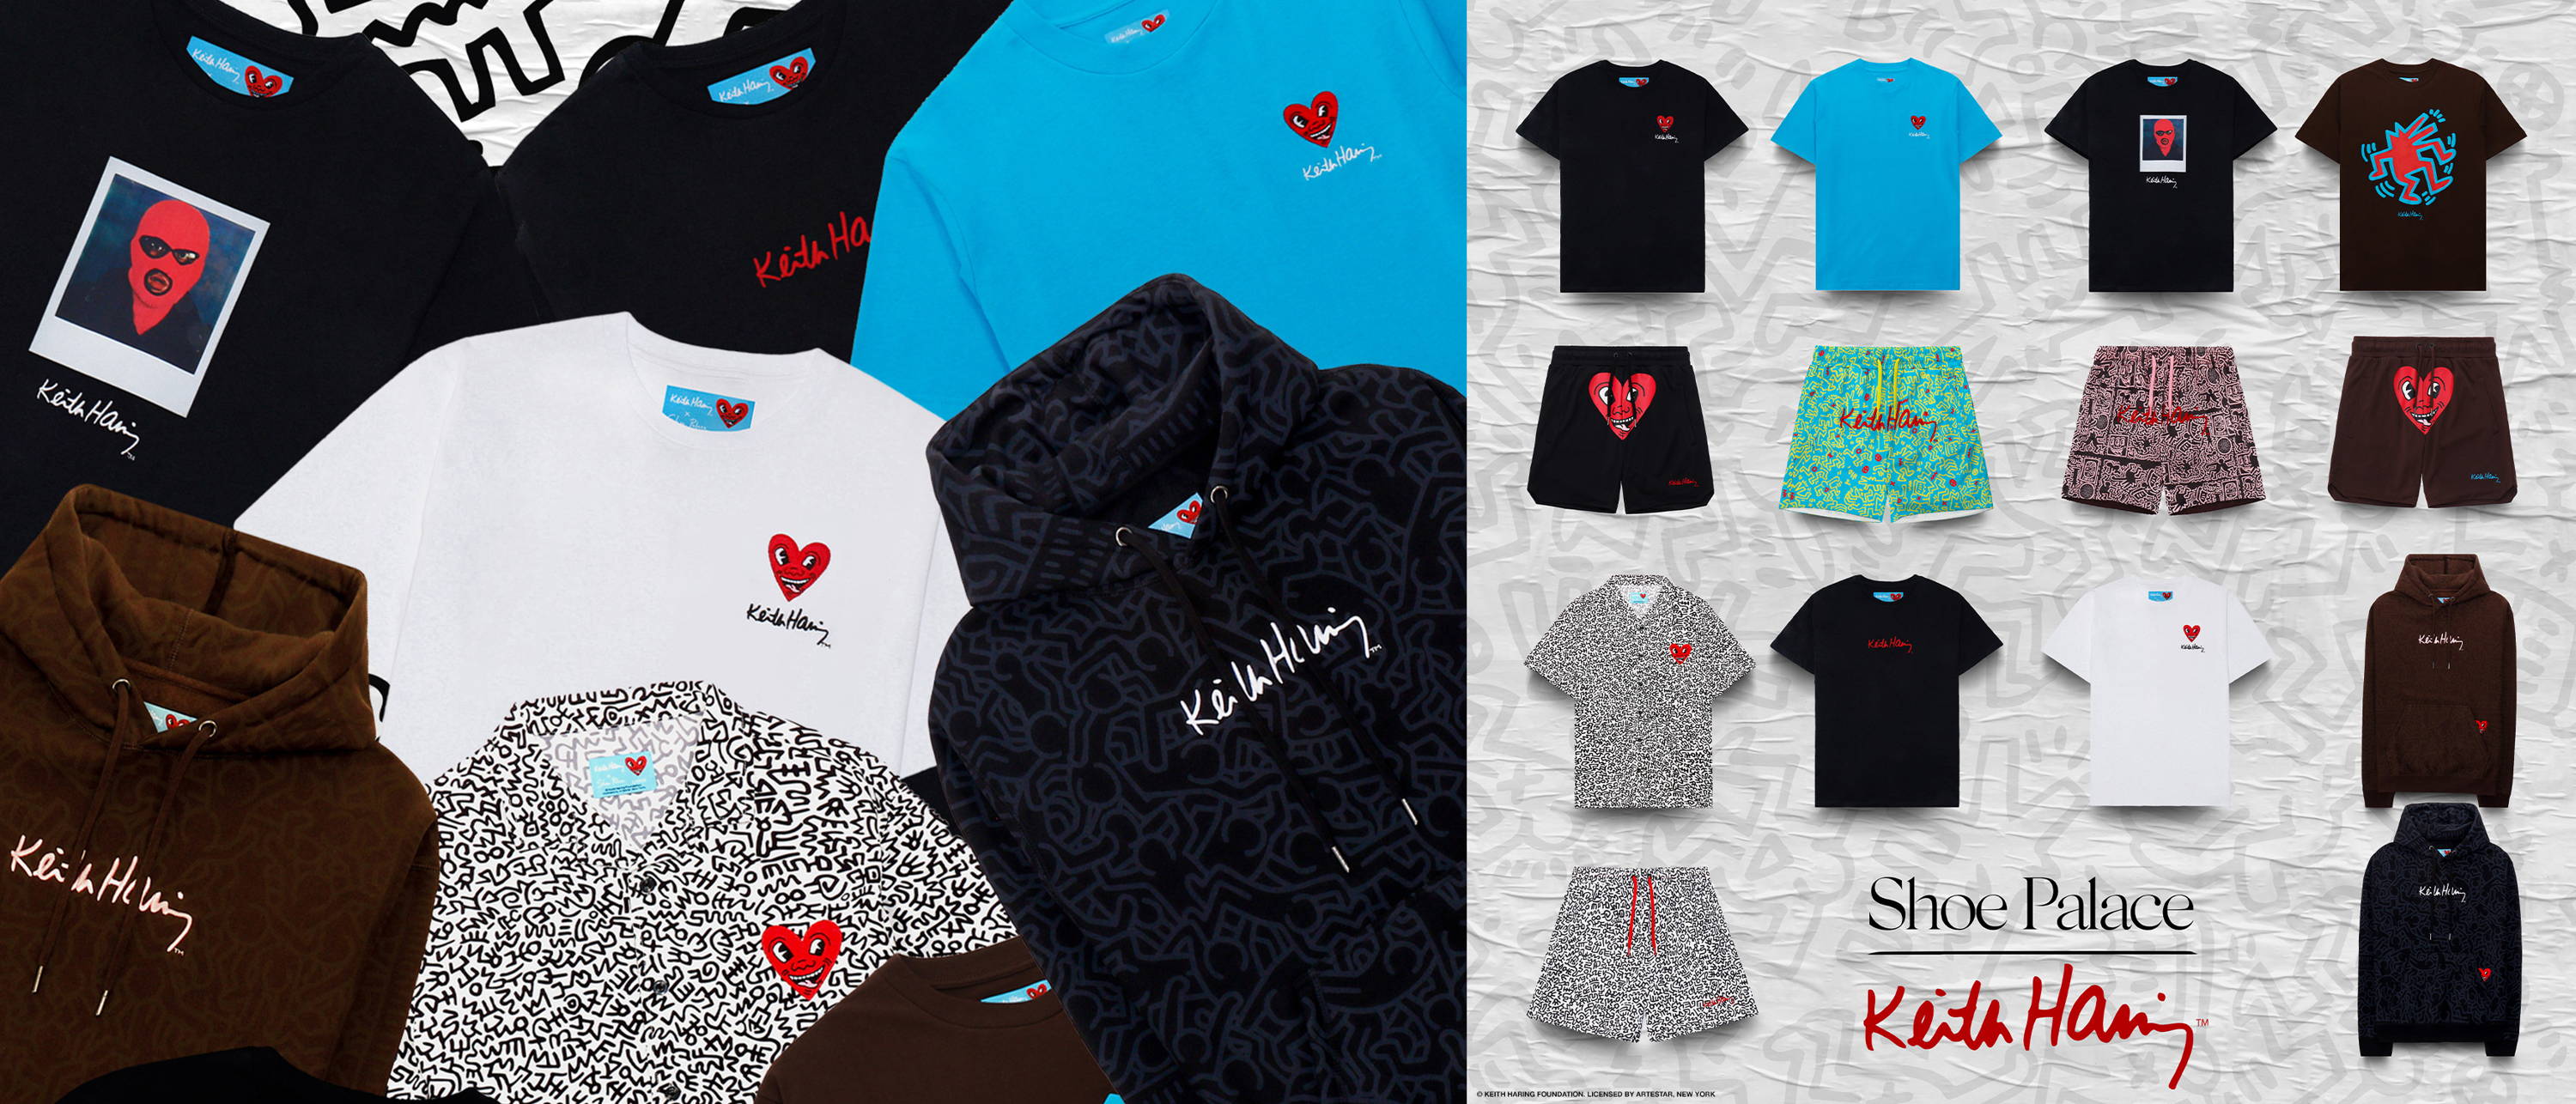 shoe palace x keith haring clothing collection